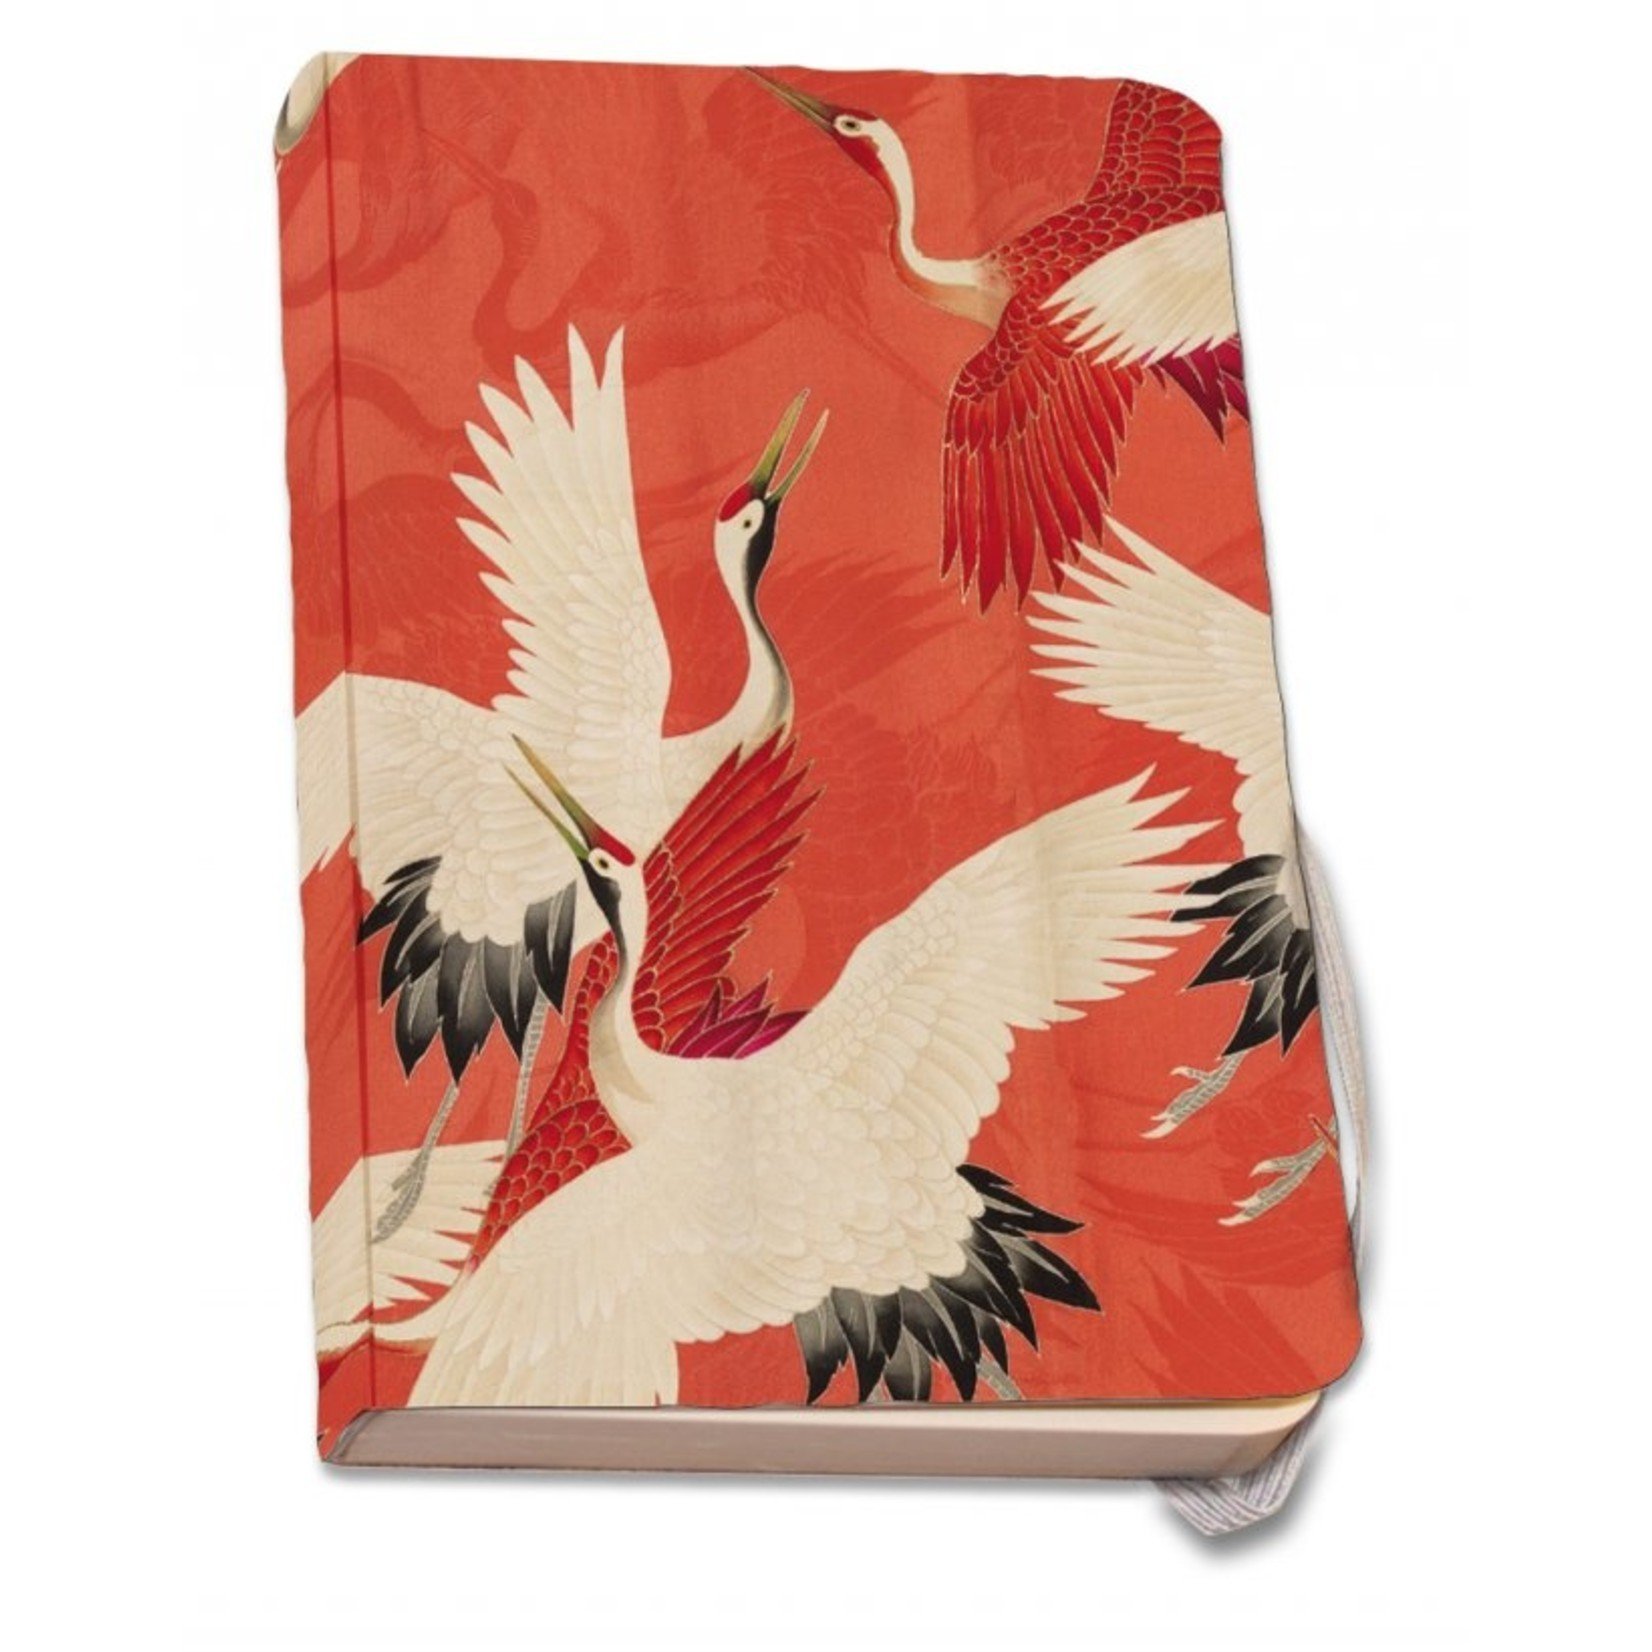 Bekking & Blitz Woman haori with Red and White Cranes(A6) Zachte kaft